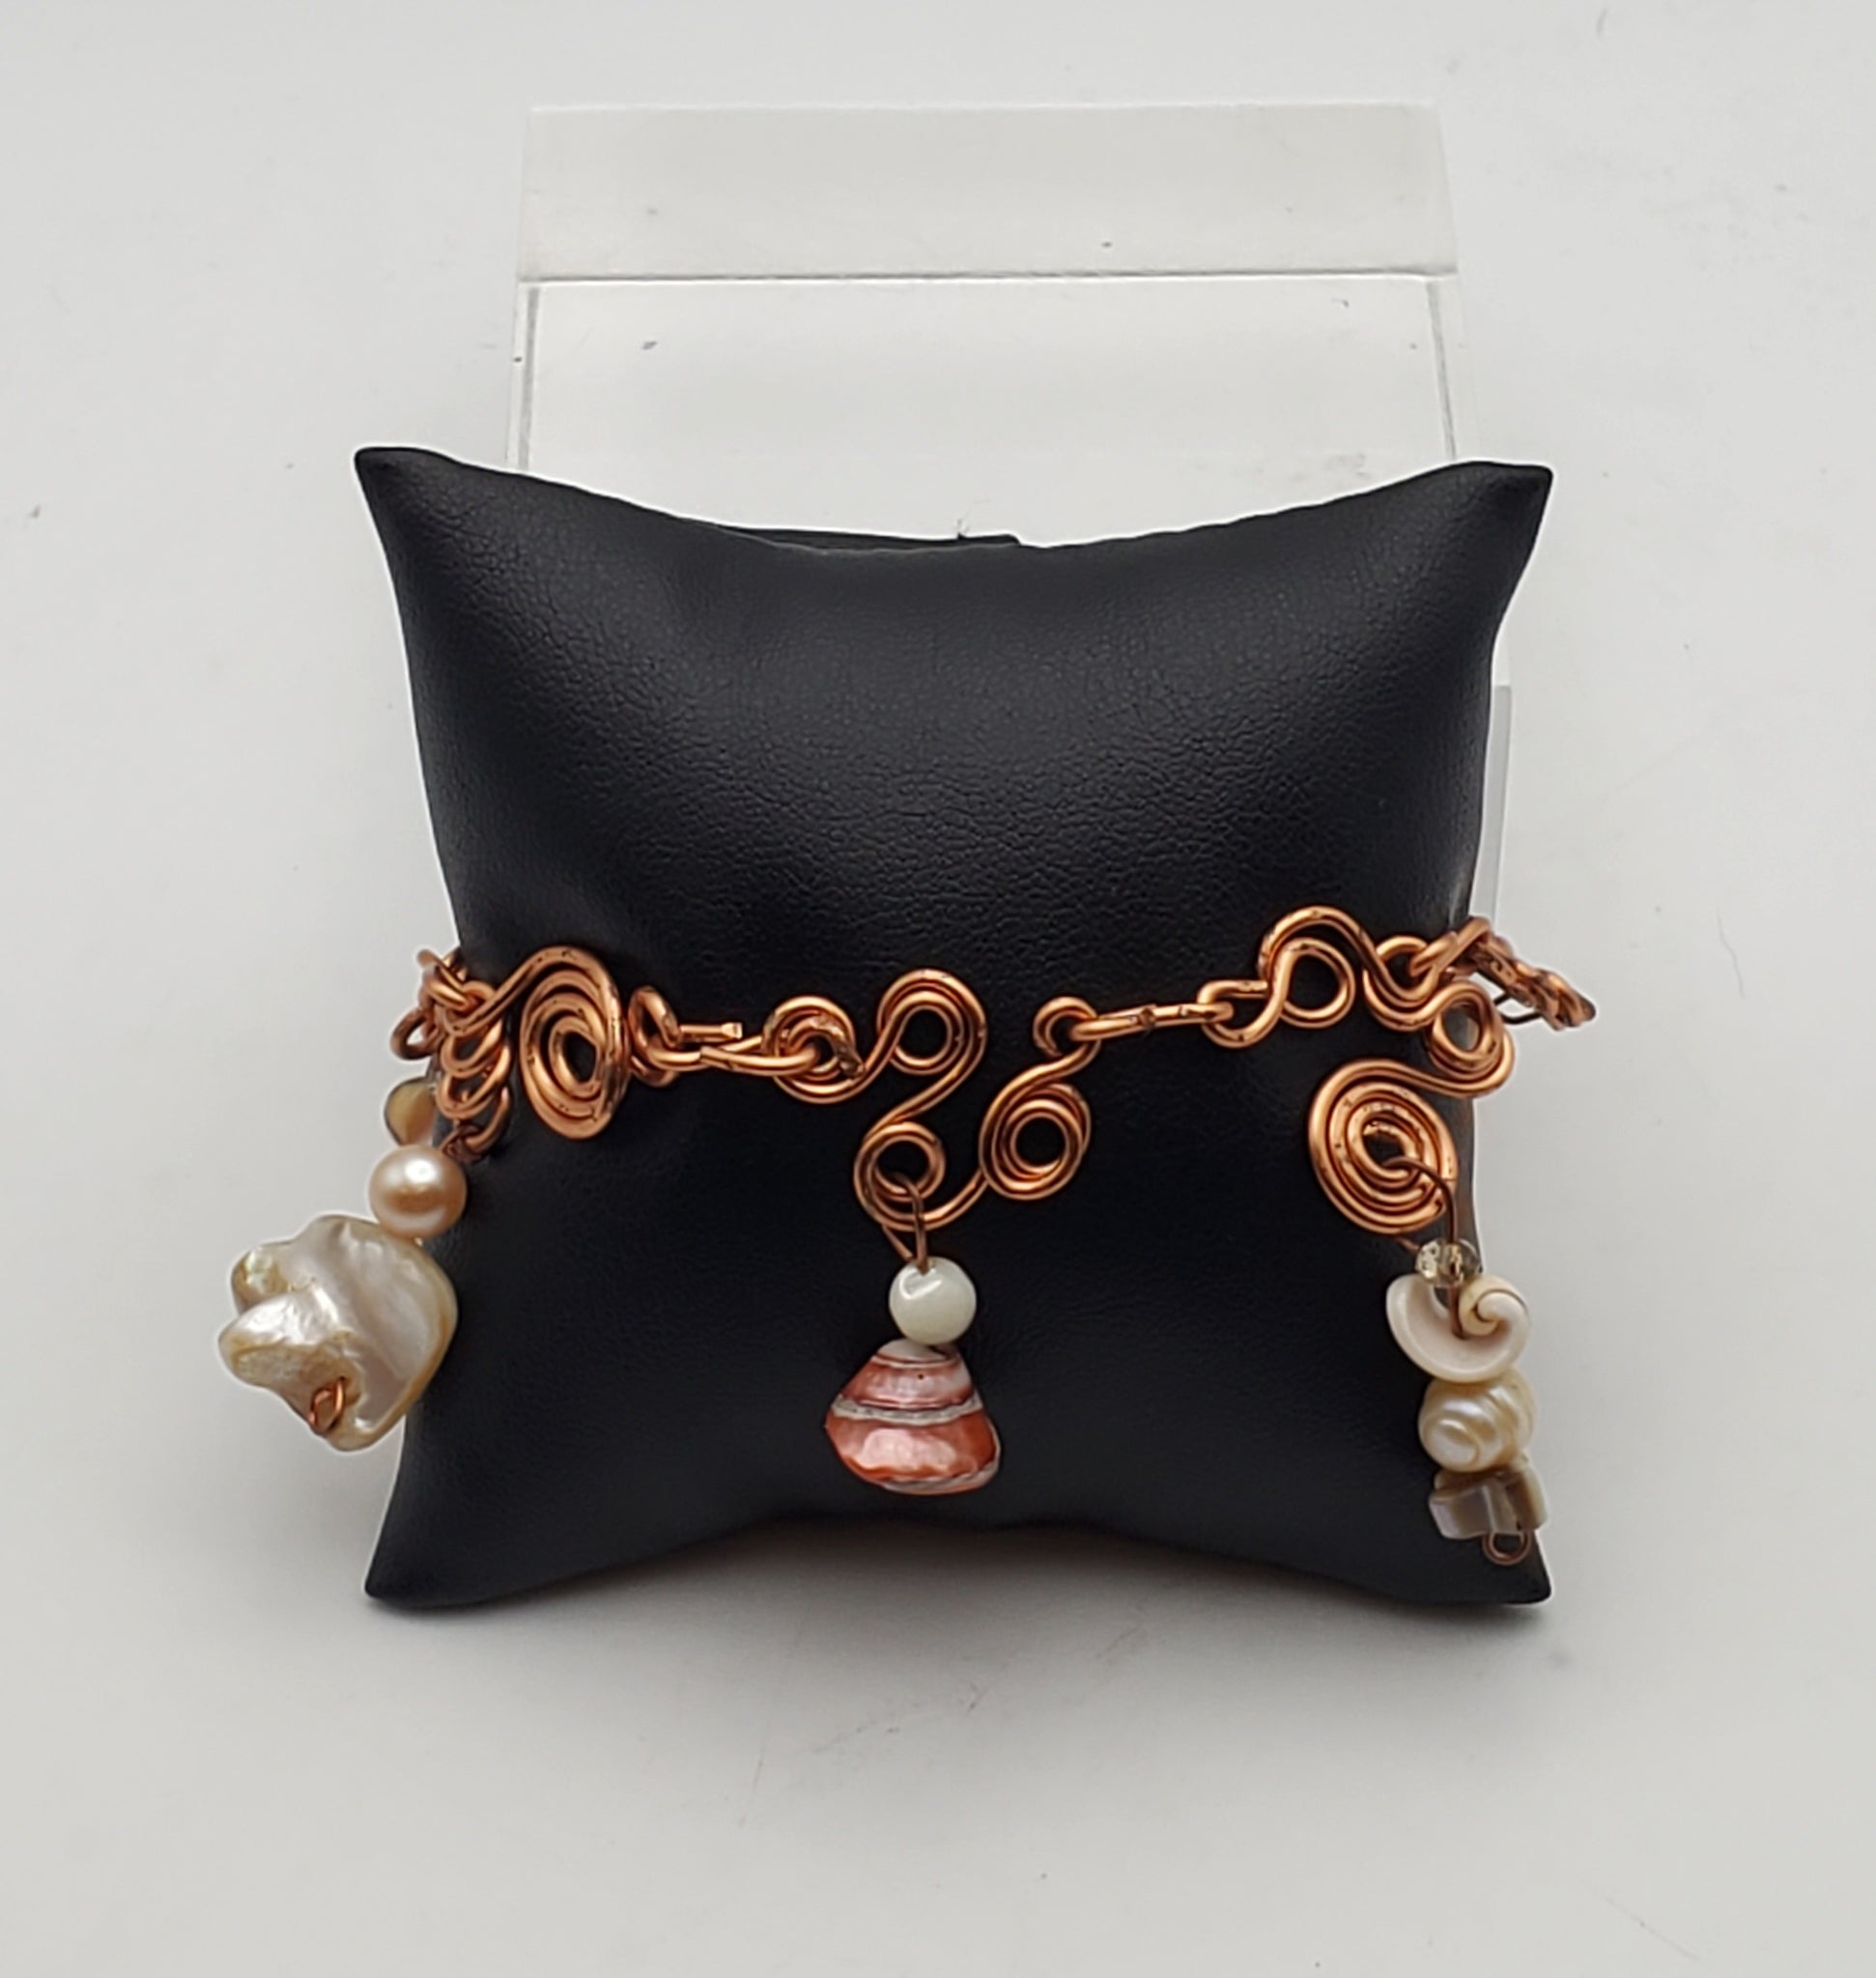 Vintage Bent Wire Copper Shell and Pearl Bracelet - 7.5"